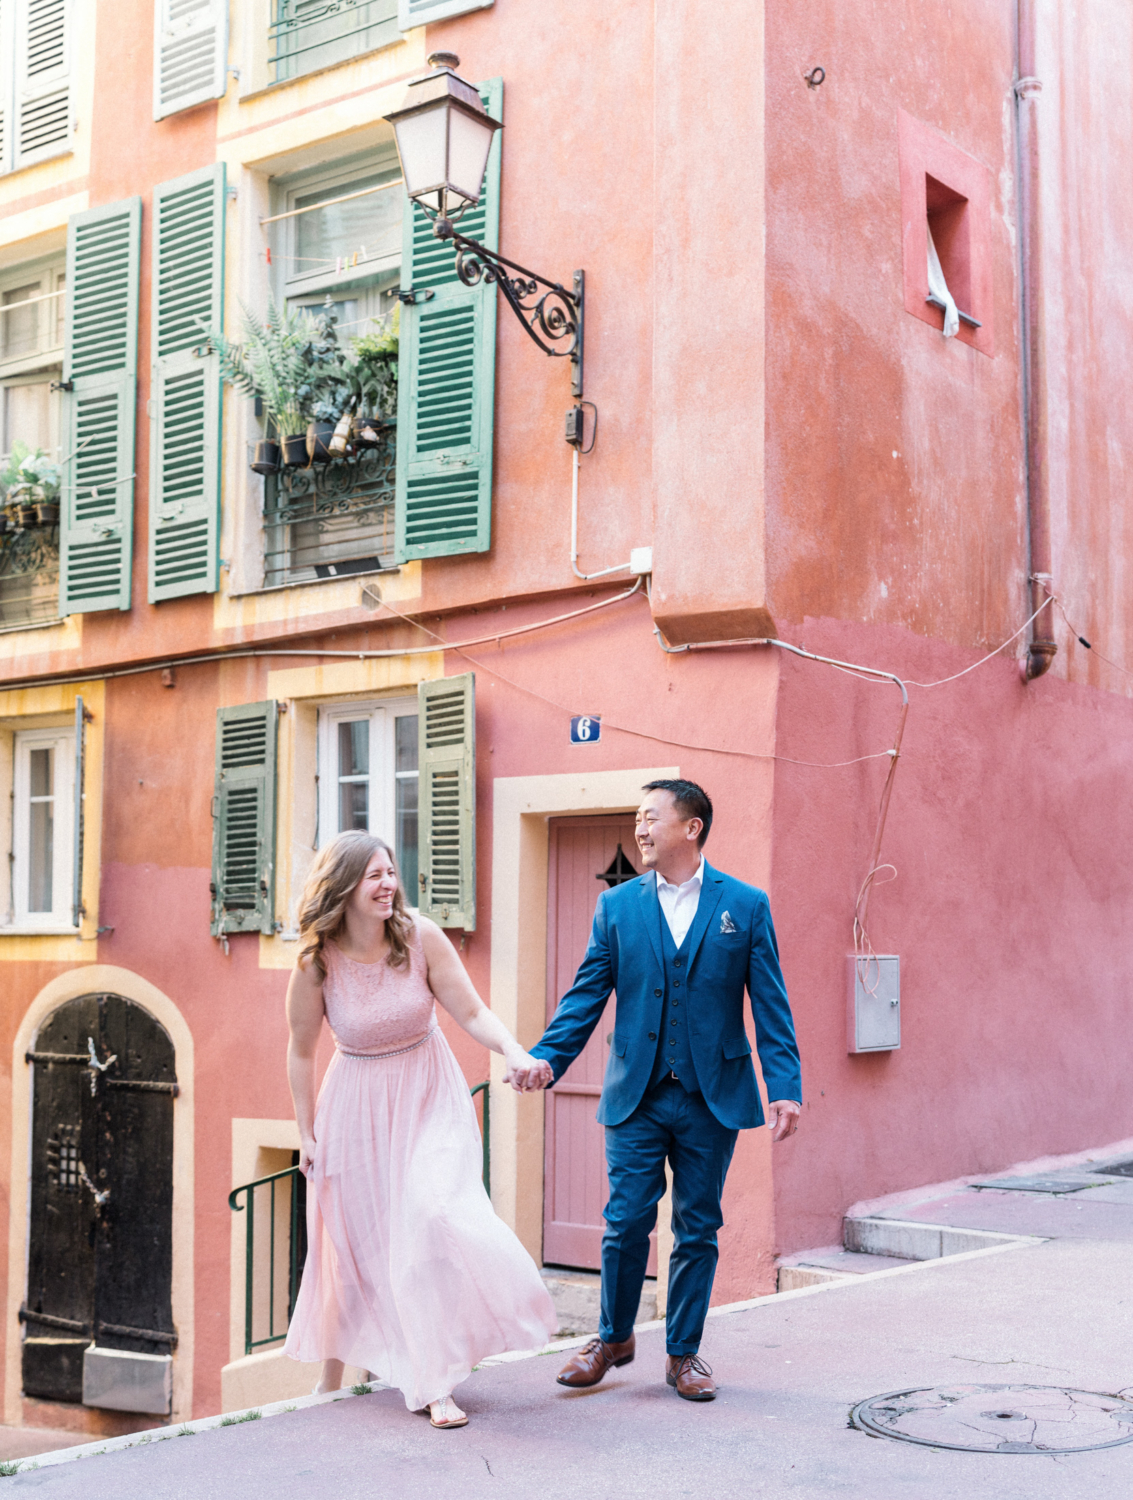 newly engaged couple laugh and walk together in nice, france